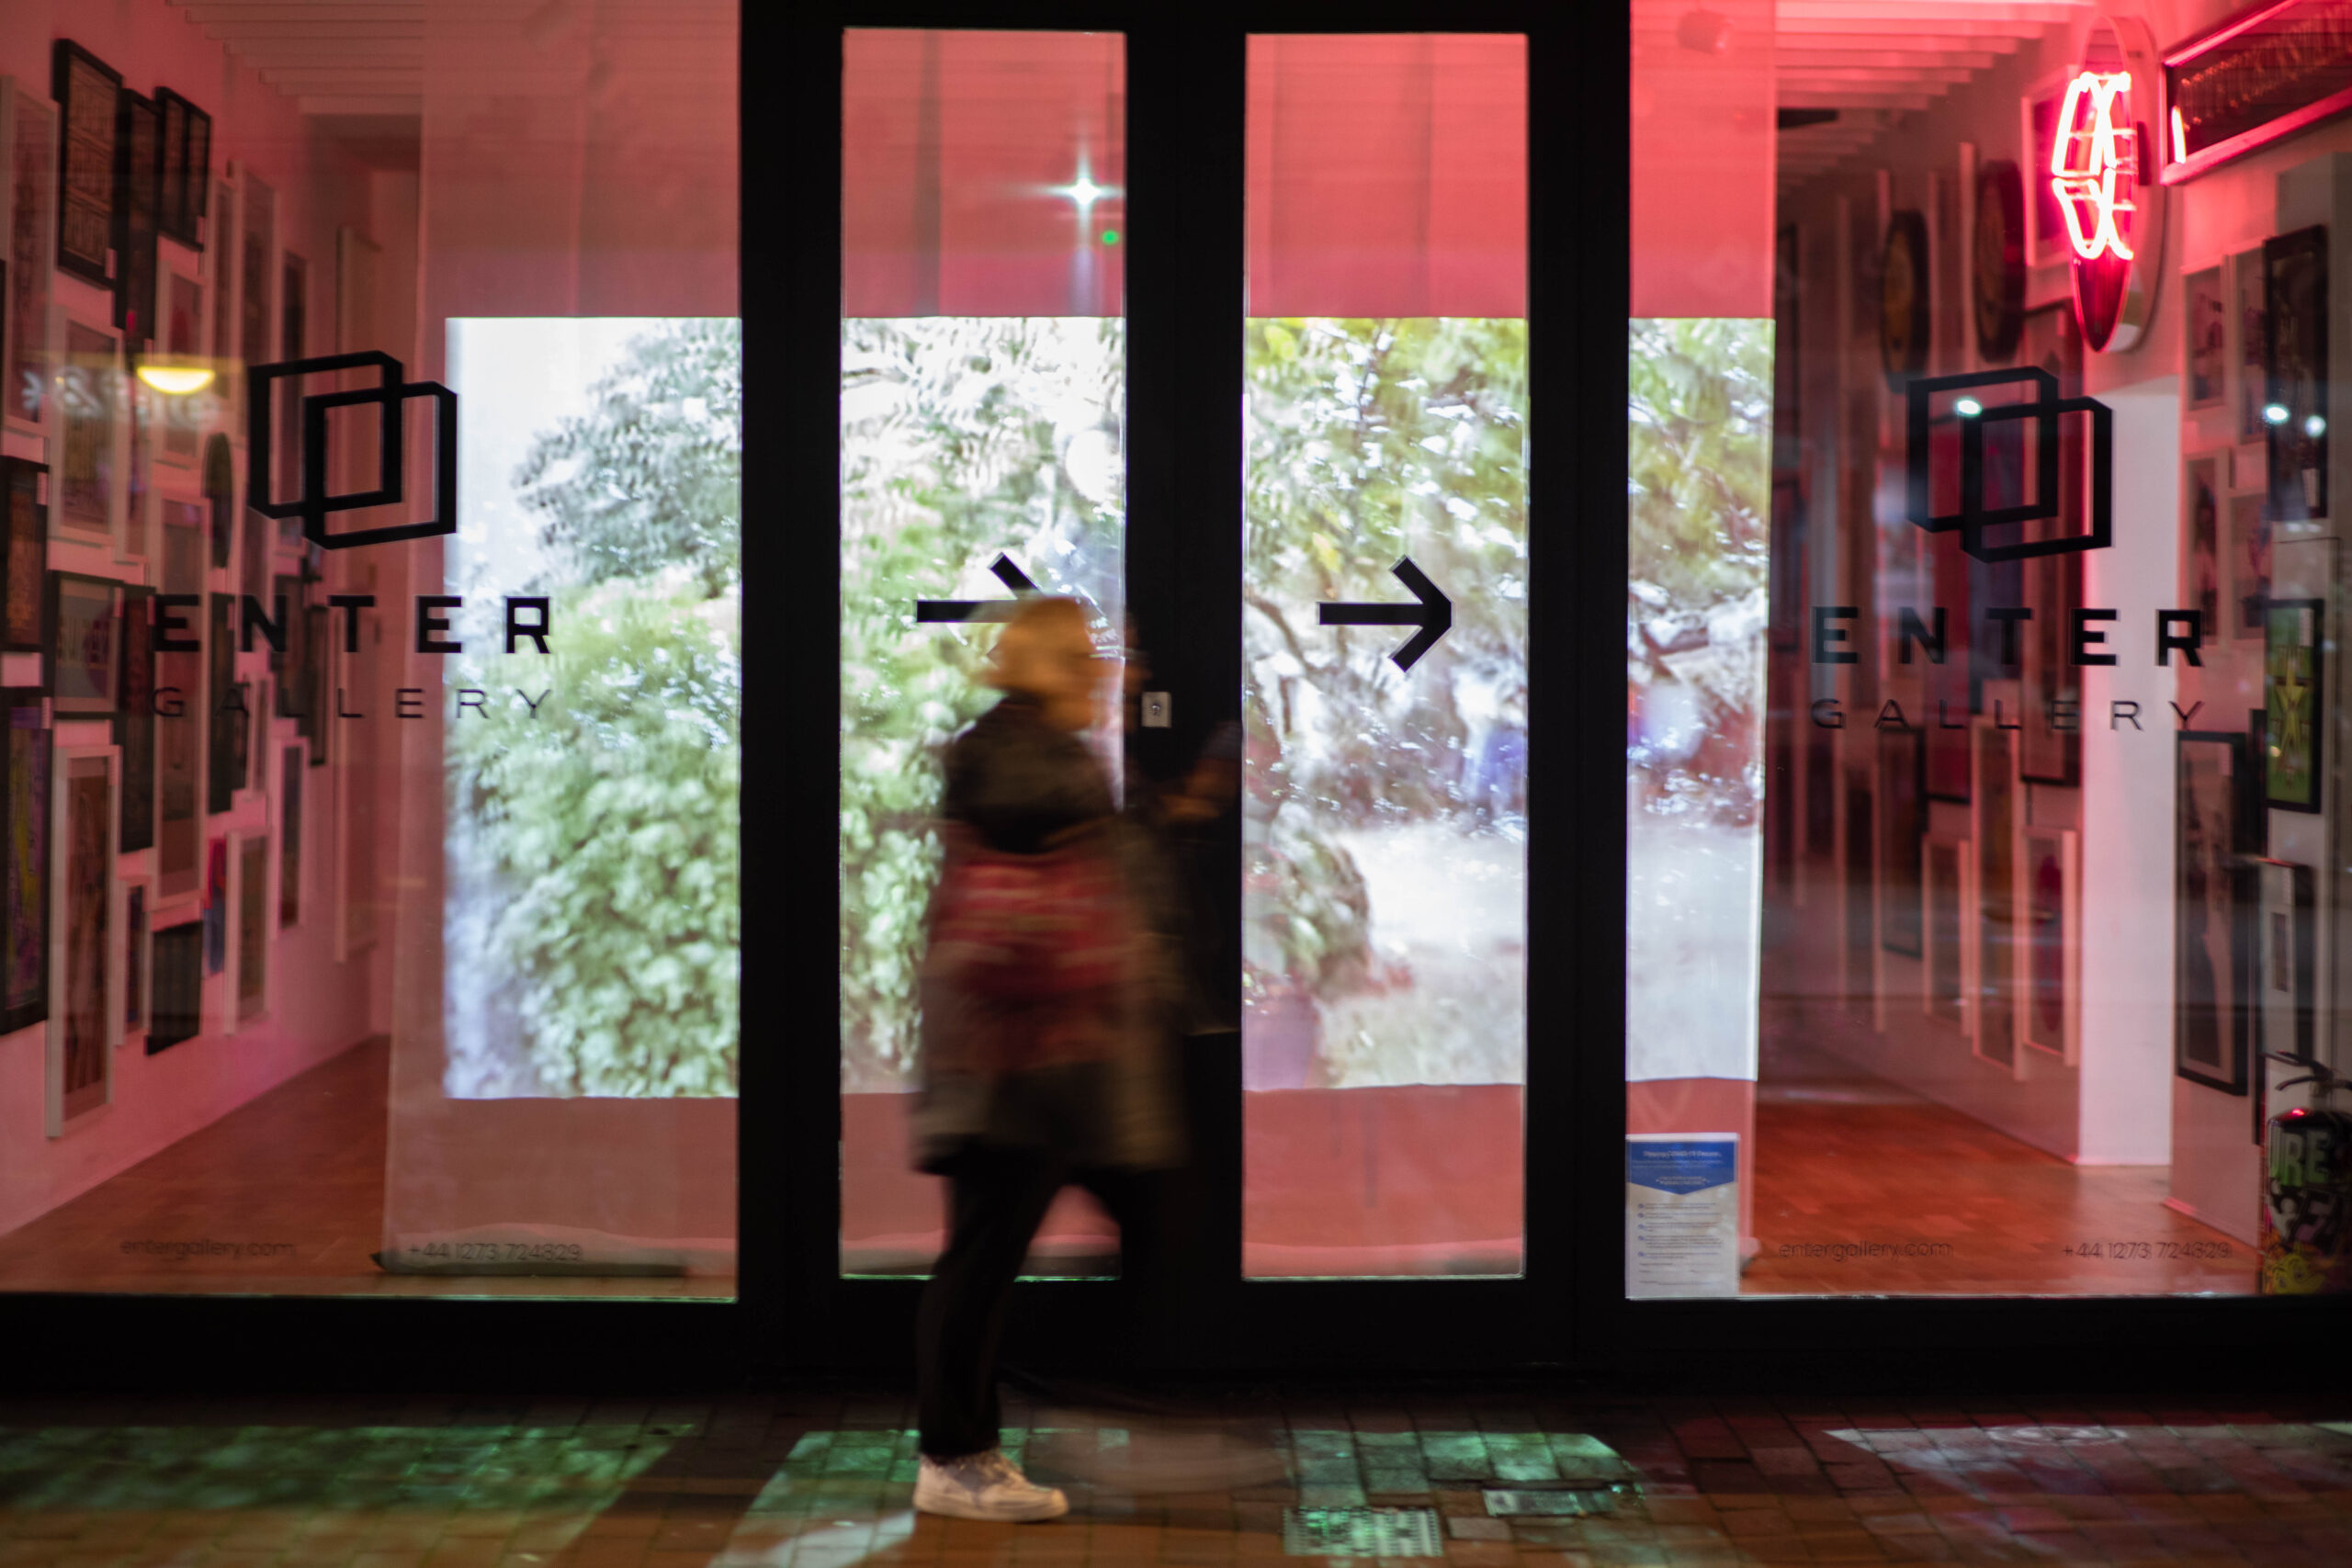 digital screen with collage of photographs through a gallery window and person walking past